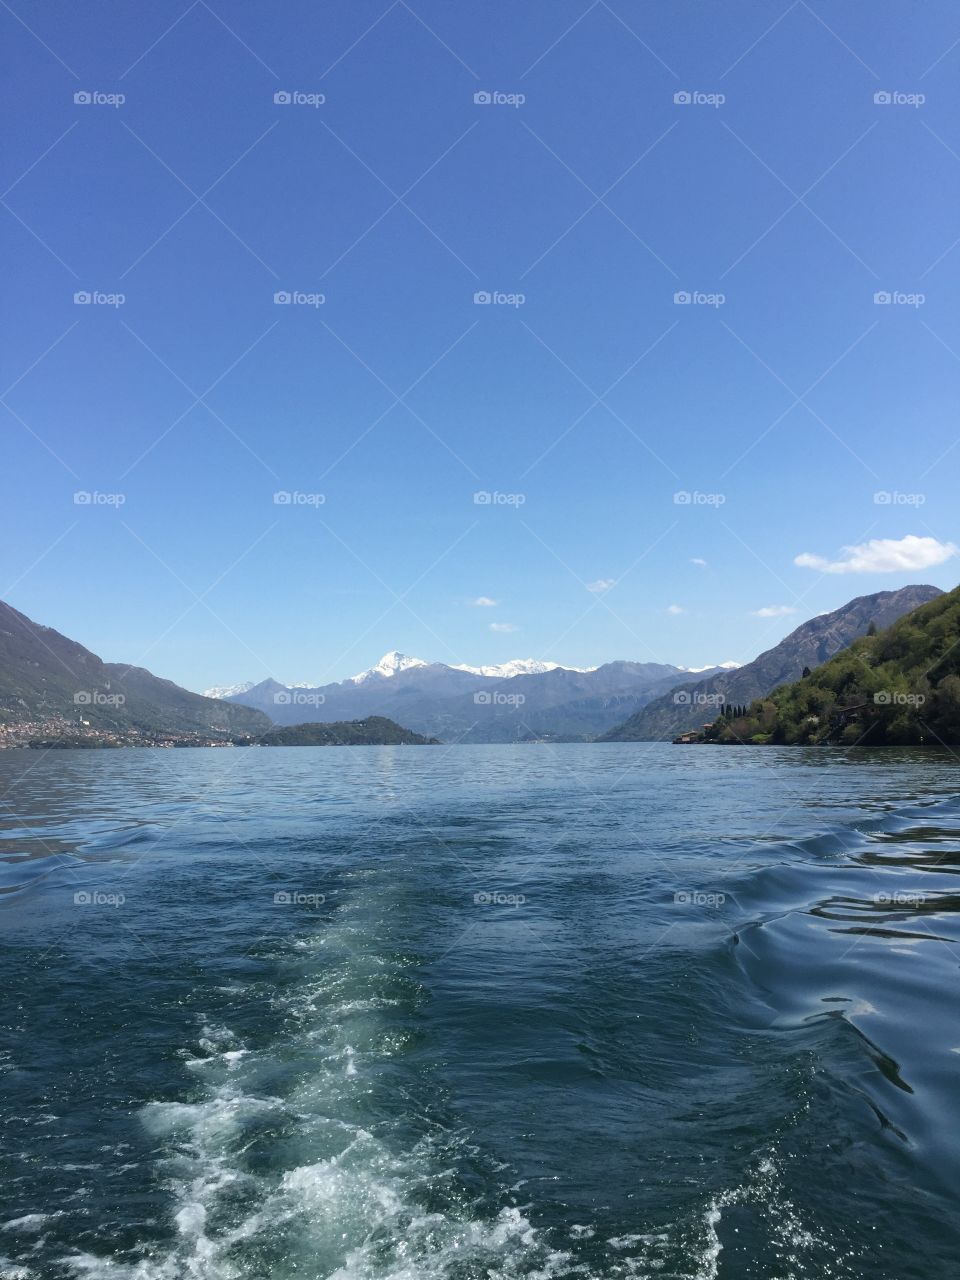 A beautiful view of Lake Como with amazing mountains.